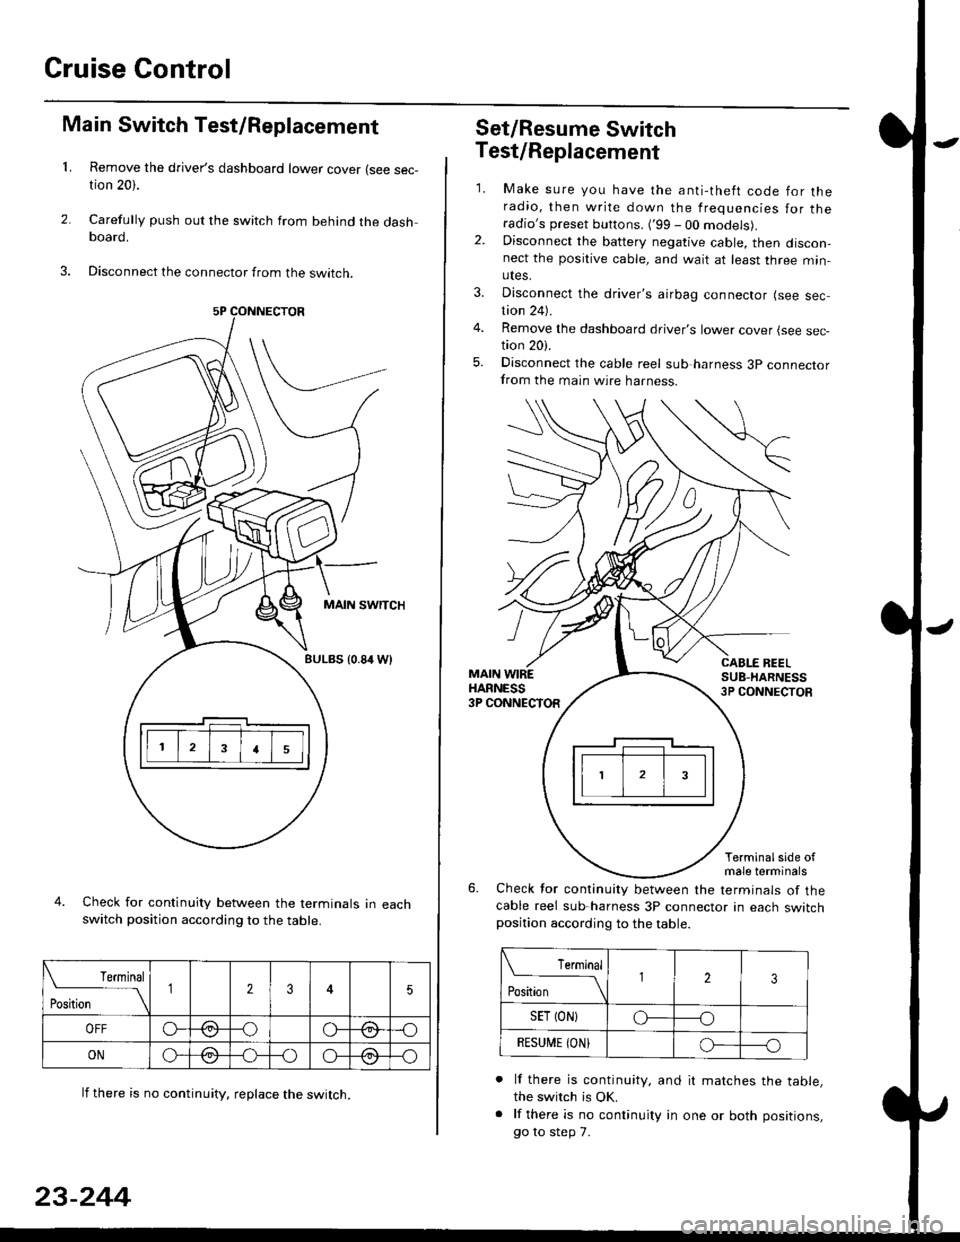 HONDA CIVIC 1998 6.G Workshop Manual Cruise Gontrol
3.
1.
2.
Main Switch Test/Replacement
Remove the drivers dashboard lower cover (see sec-tion 20).
Carefully push out the switch from behind the dashboard.
Disconnect the connector from